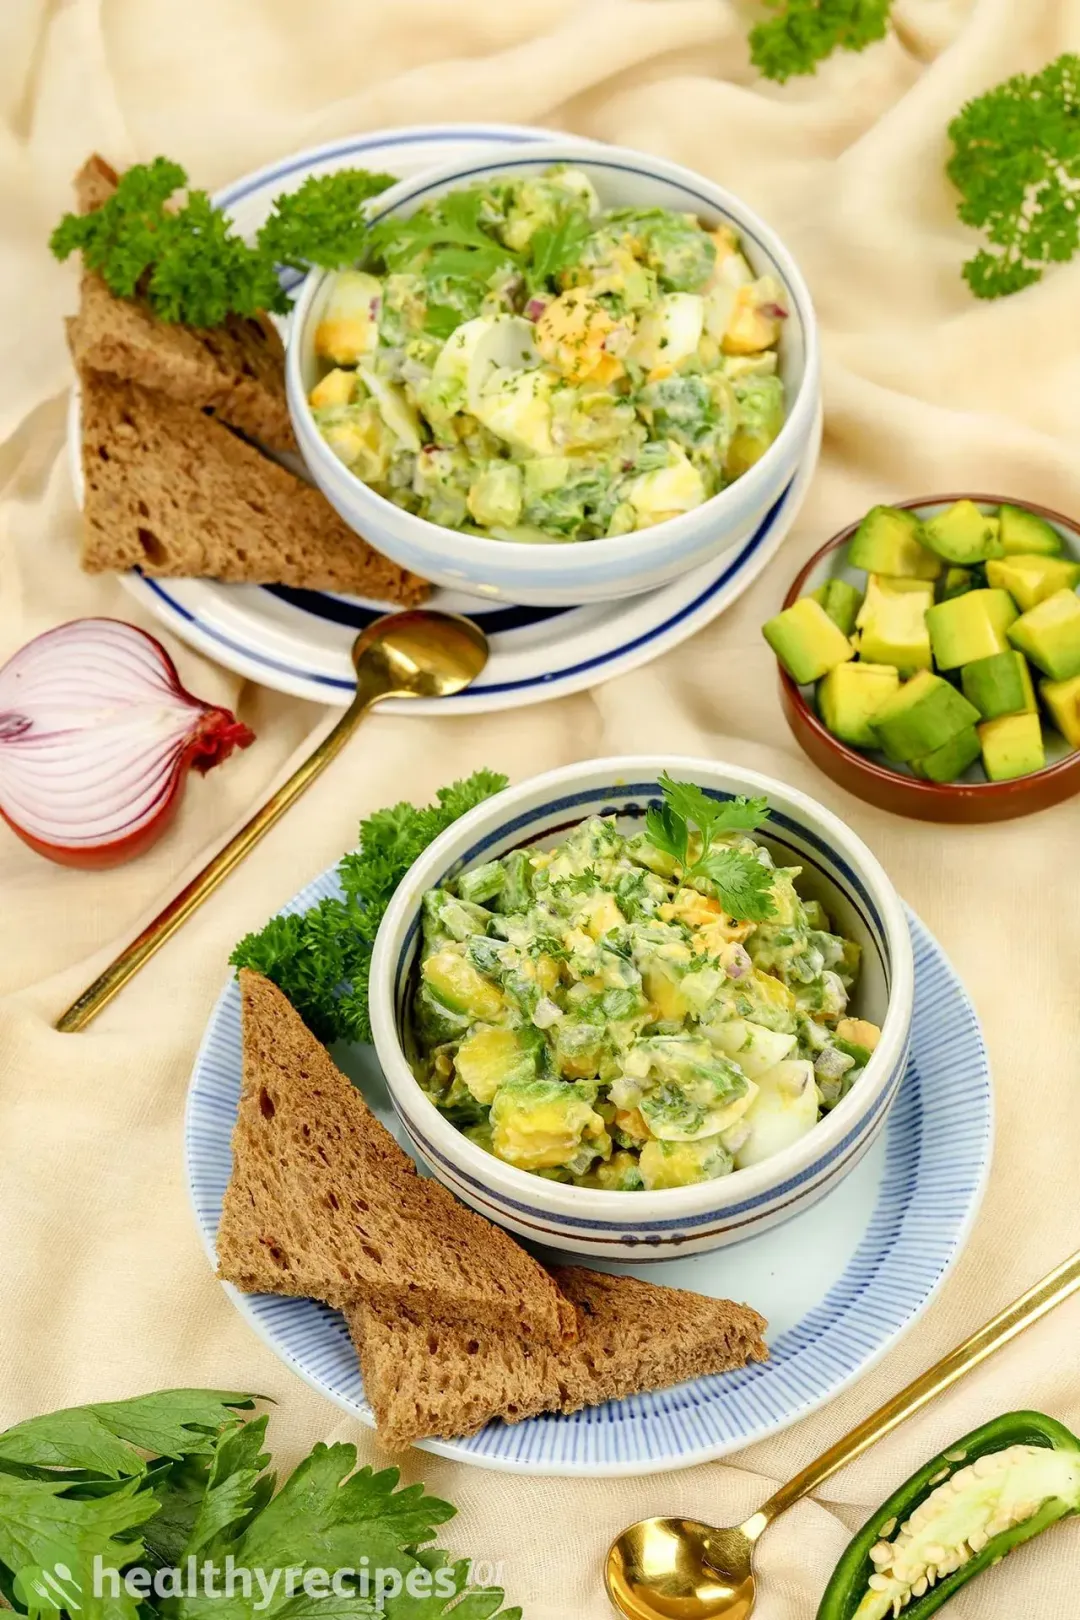 How to Prepare the Ingredients for avocado egg salad